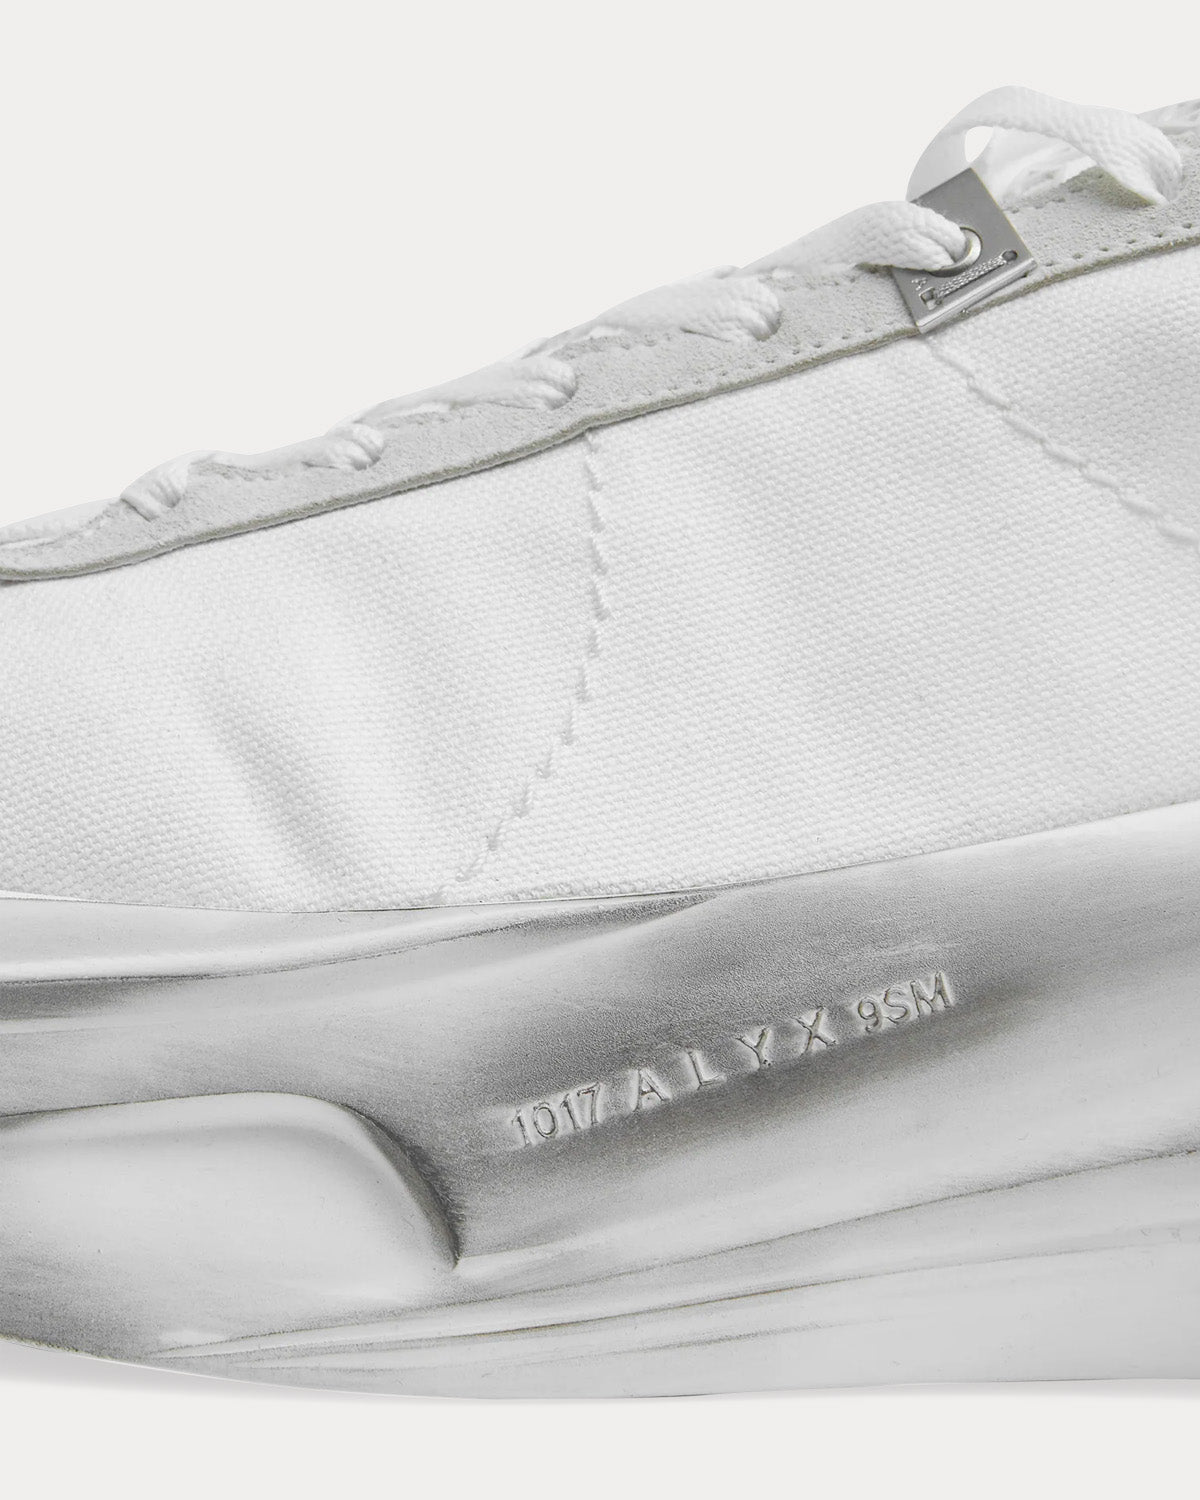 1017 ALYX 9SM - Treated Aria White Low Top Sneakers